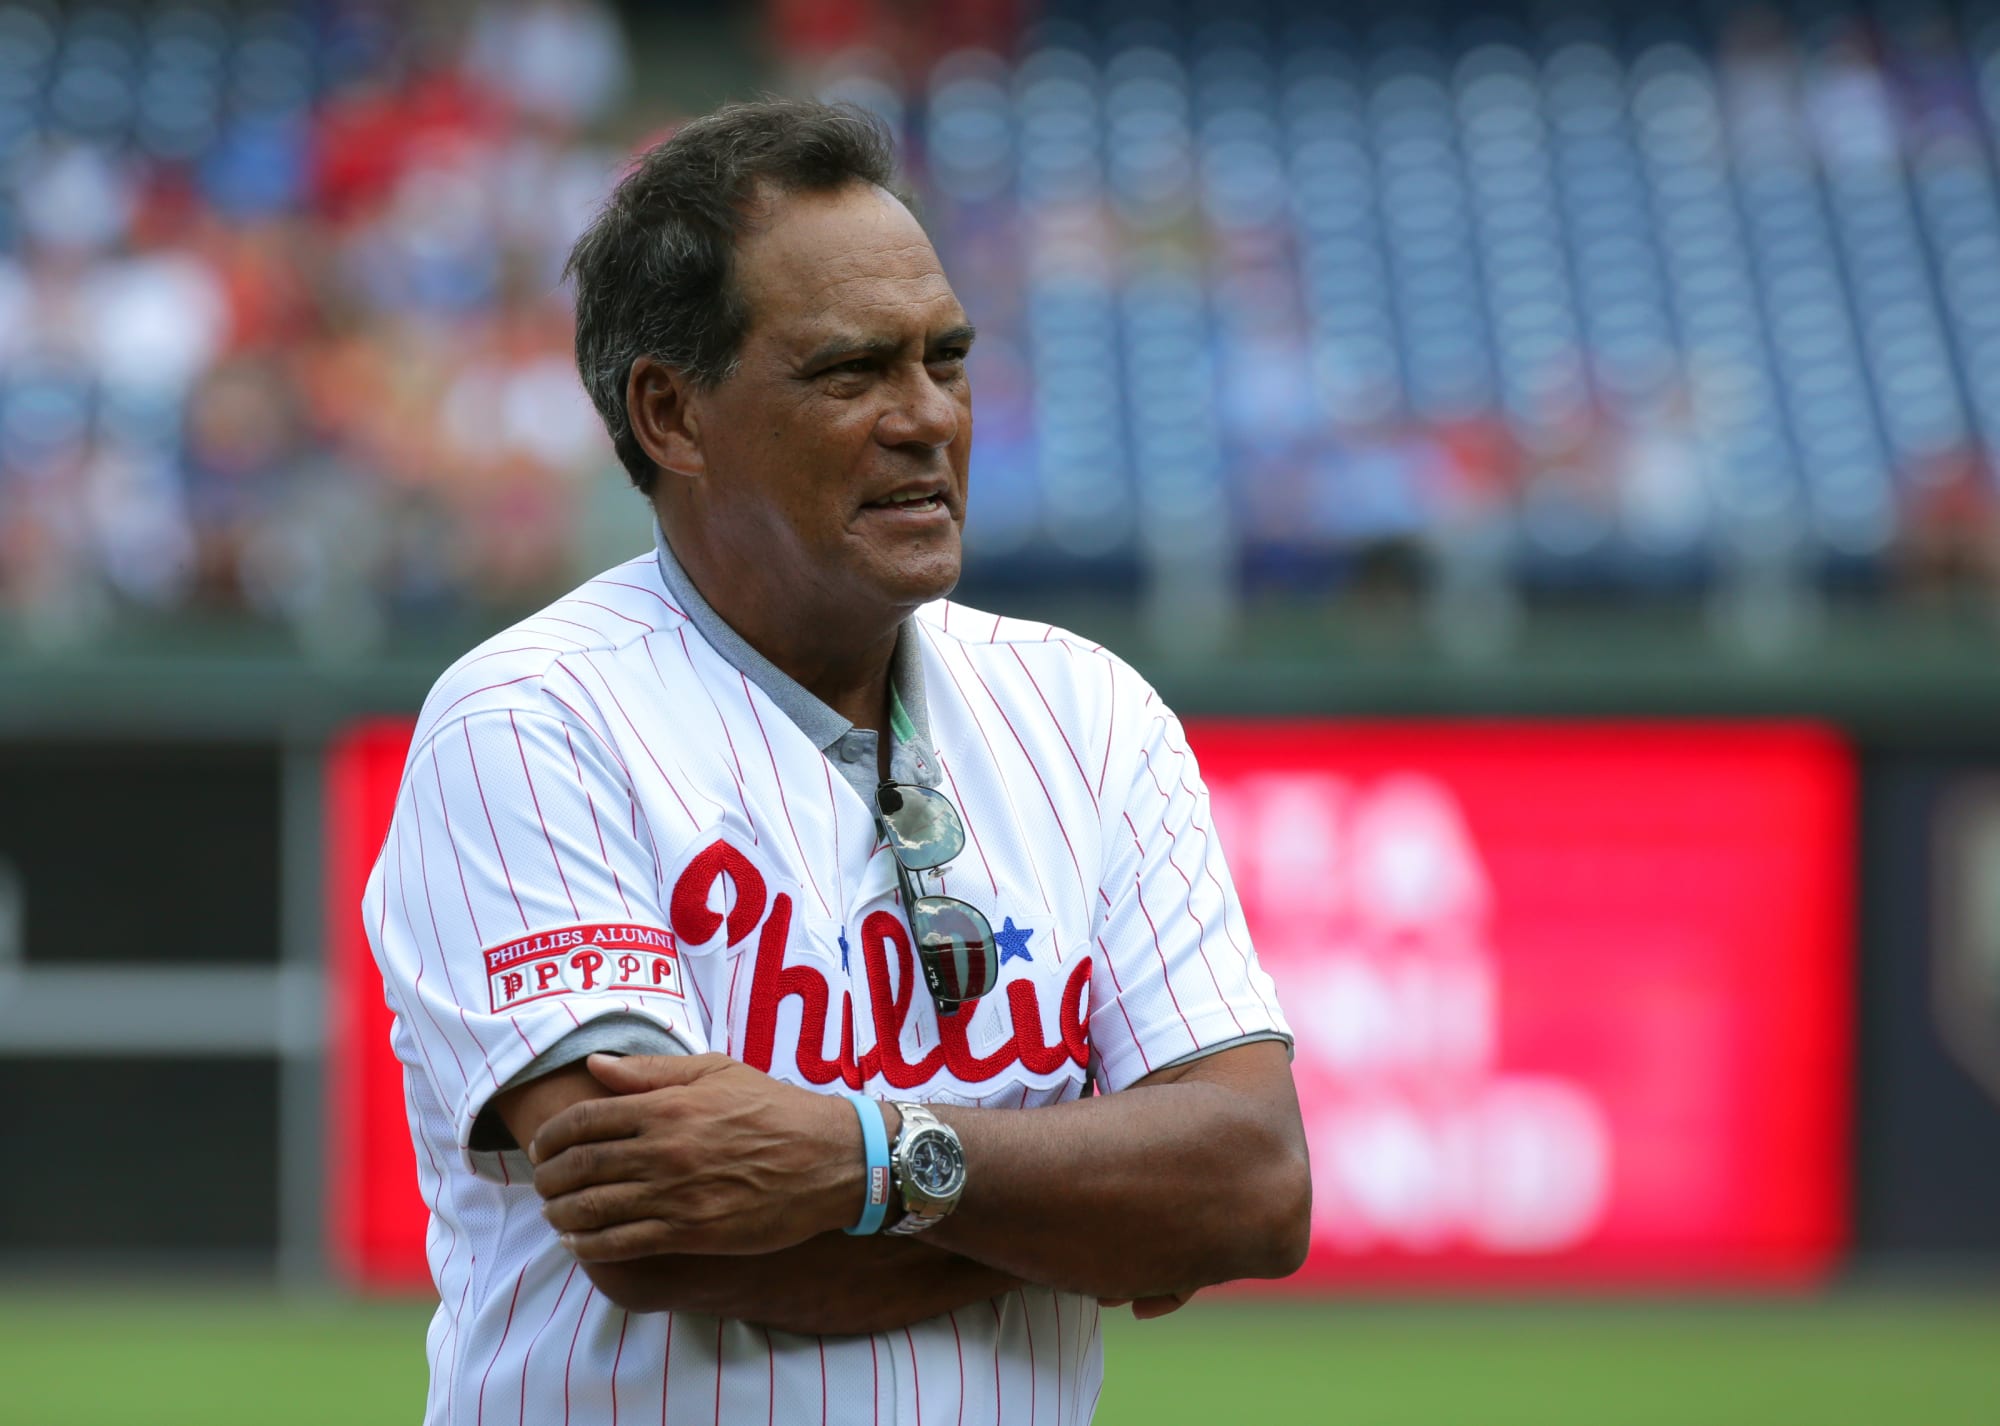 Phillies set new date for Manny Trillo Wall of Fame Night